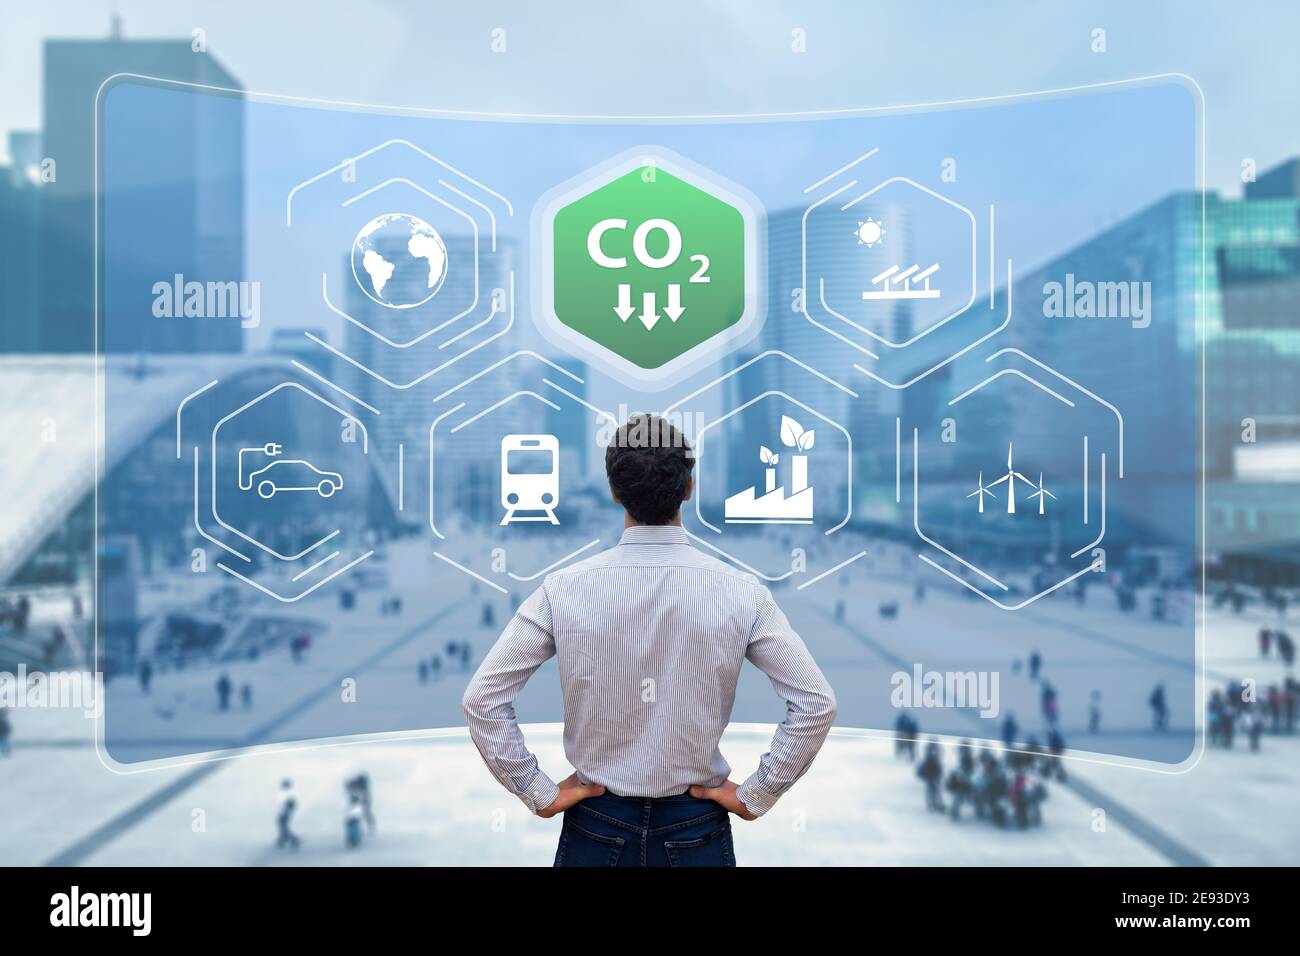 Reduce Carbon Dioxide Emissions to Limit Global Warming and Climate Change. Commitment to Paris Agreement to Lower CO2 levels with Sustainable Develop Stock Photo